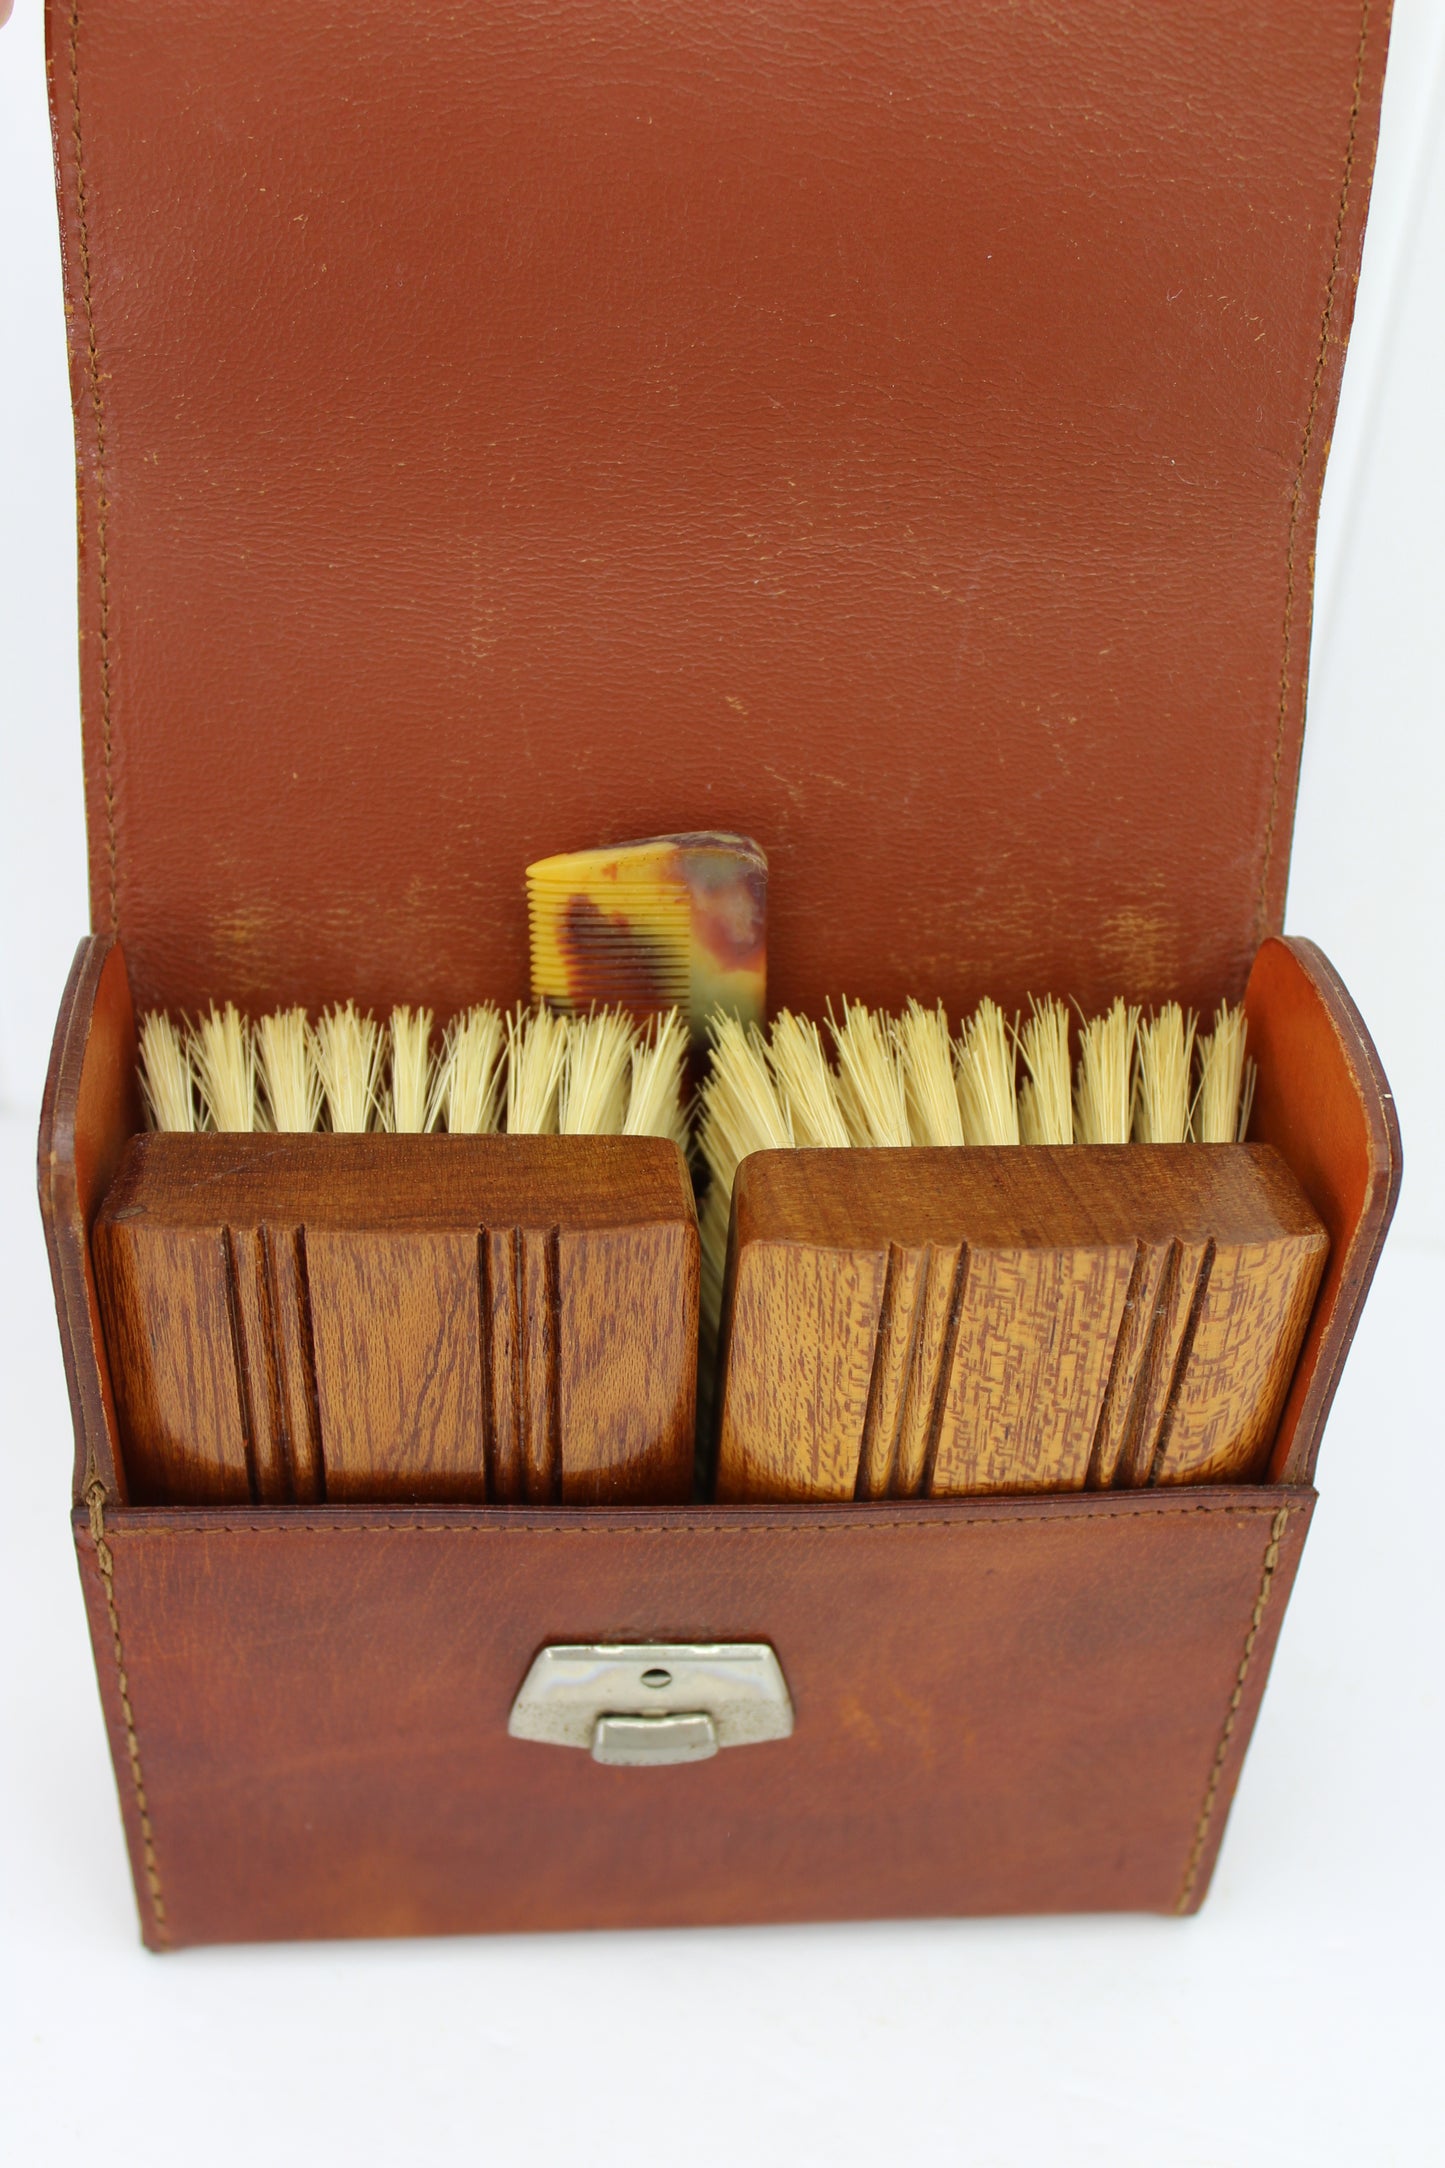 Leather Travel Box England 2 Brushes Tortoise Comb Excellent Gentleman's Treasure very nice collectible